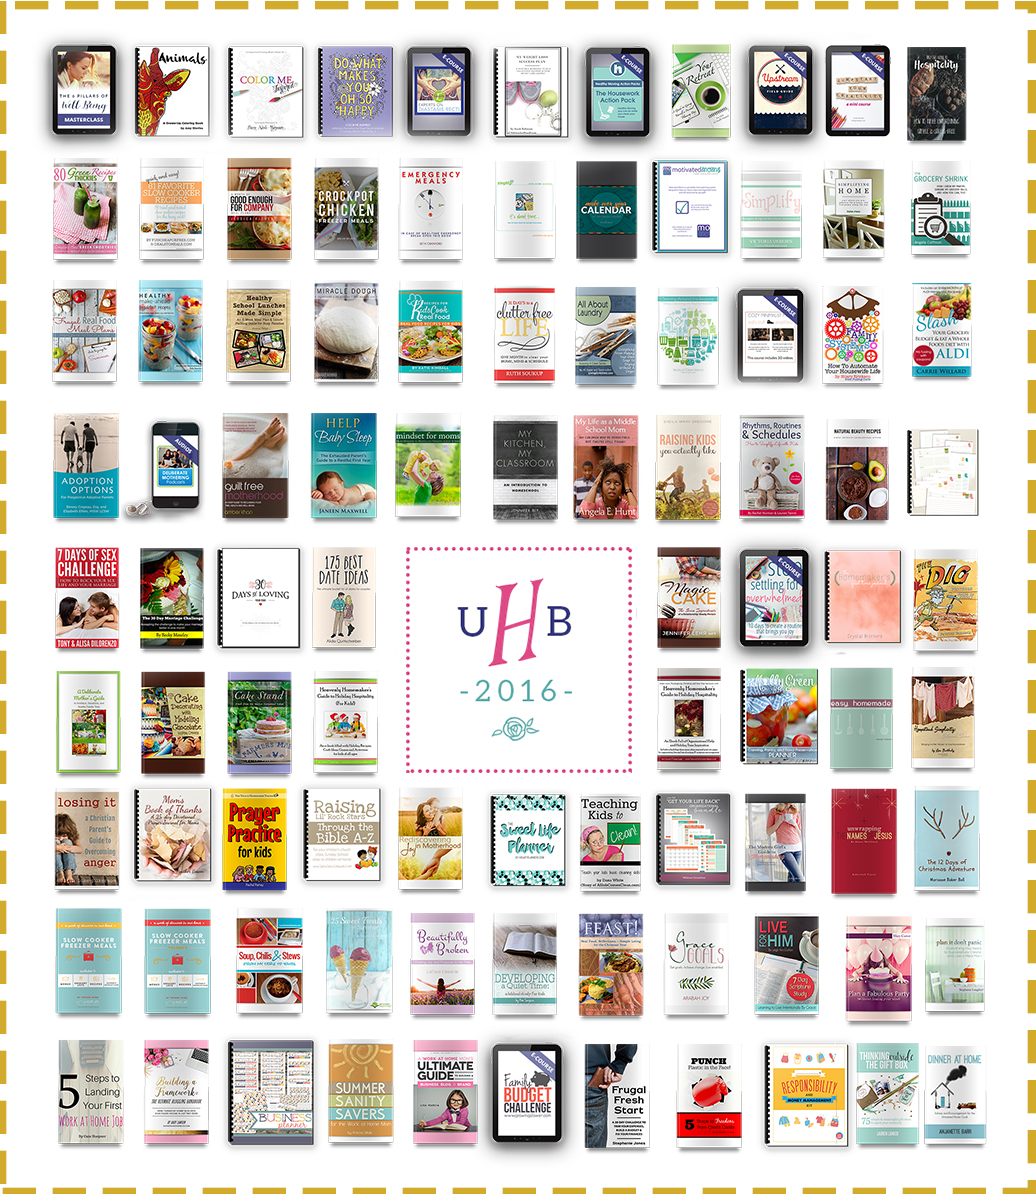 The Ultimate Homemaking Bundle - over 90 eBooks, eCourses and practical printables filled with useful tips and tricks on homemaking... for moms by moms!